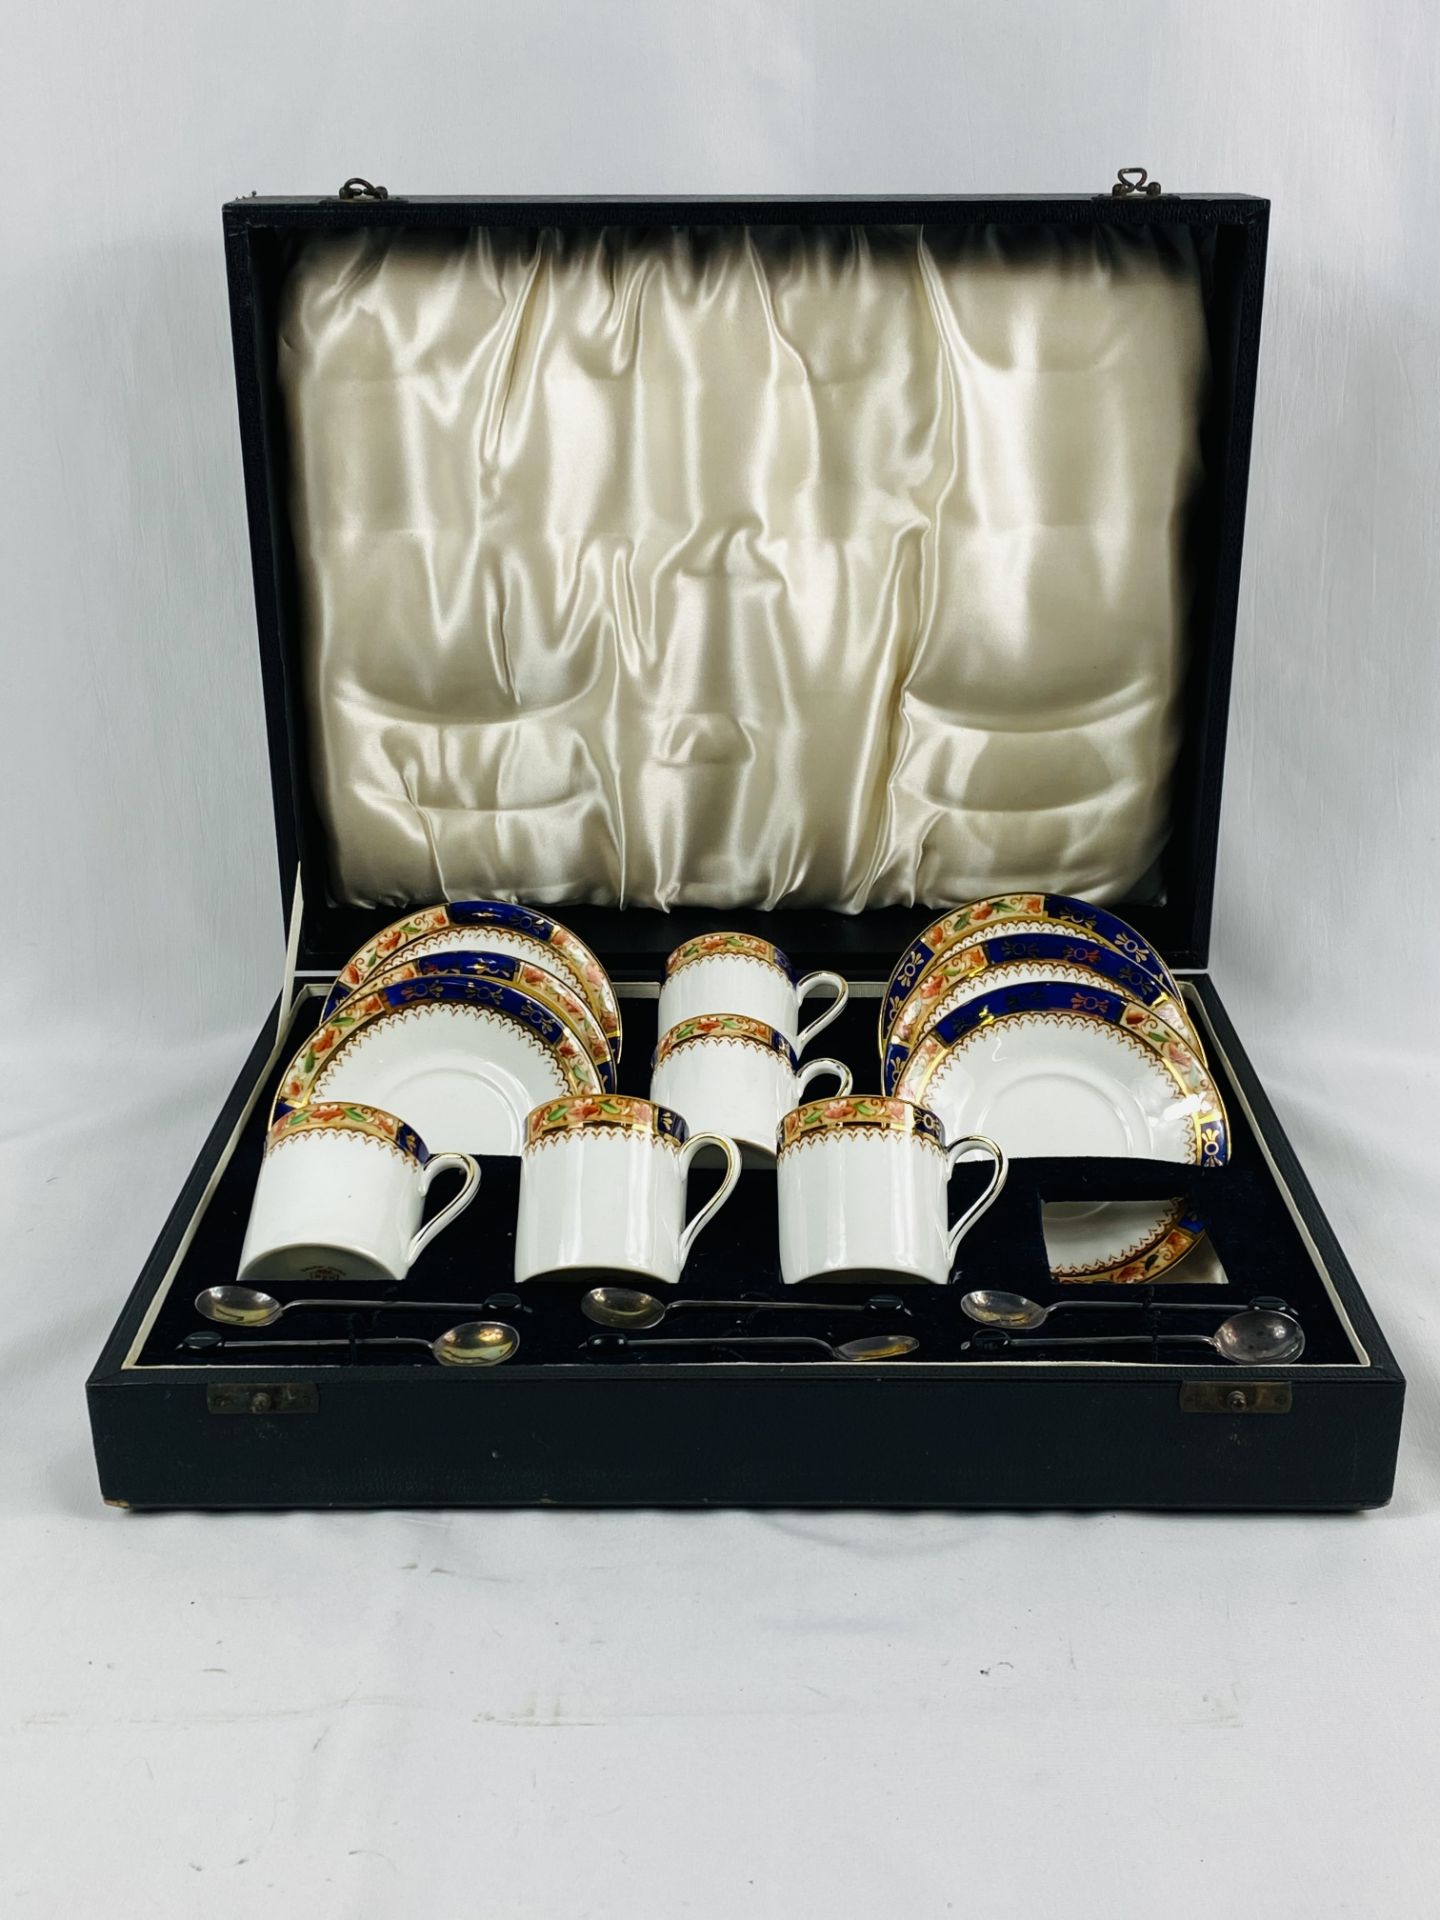 Porcelain part coffee set with silver spoons - Image 7 of 8